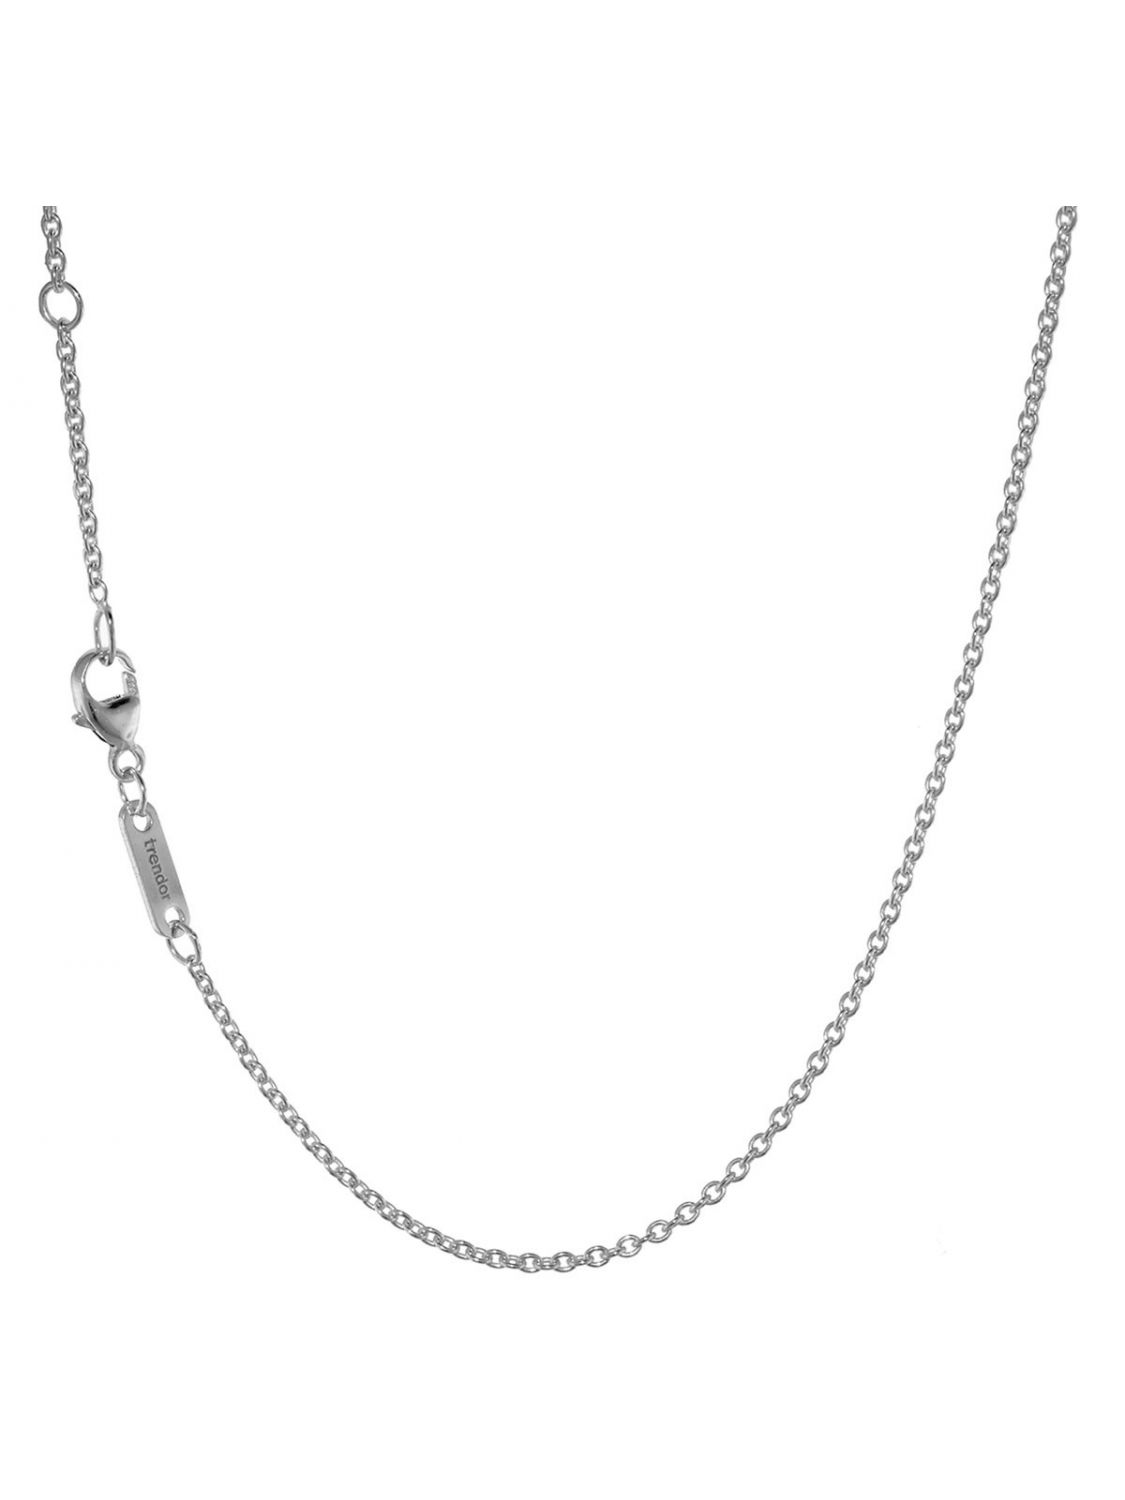 Buy Necklaces for Children Online | My Little Silver